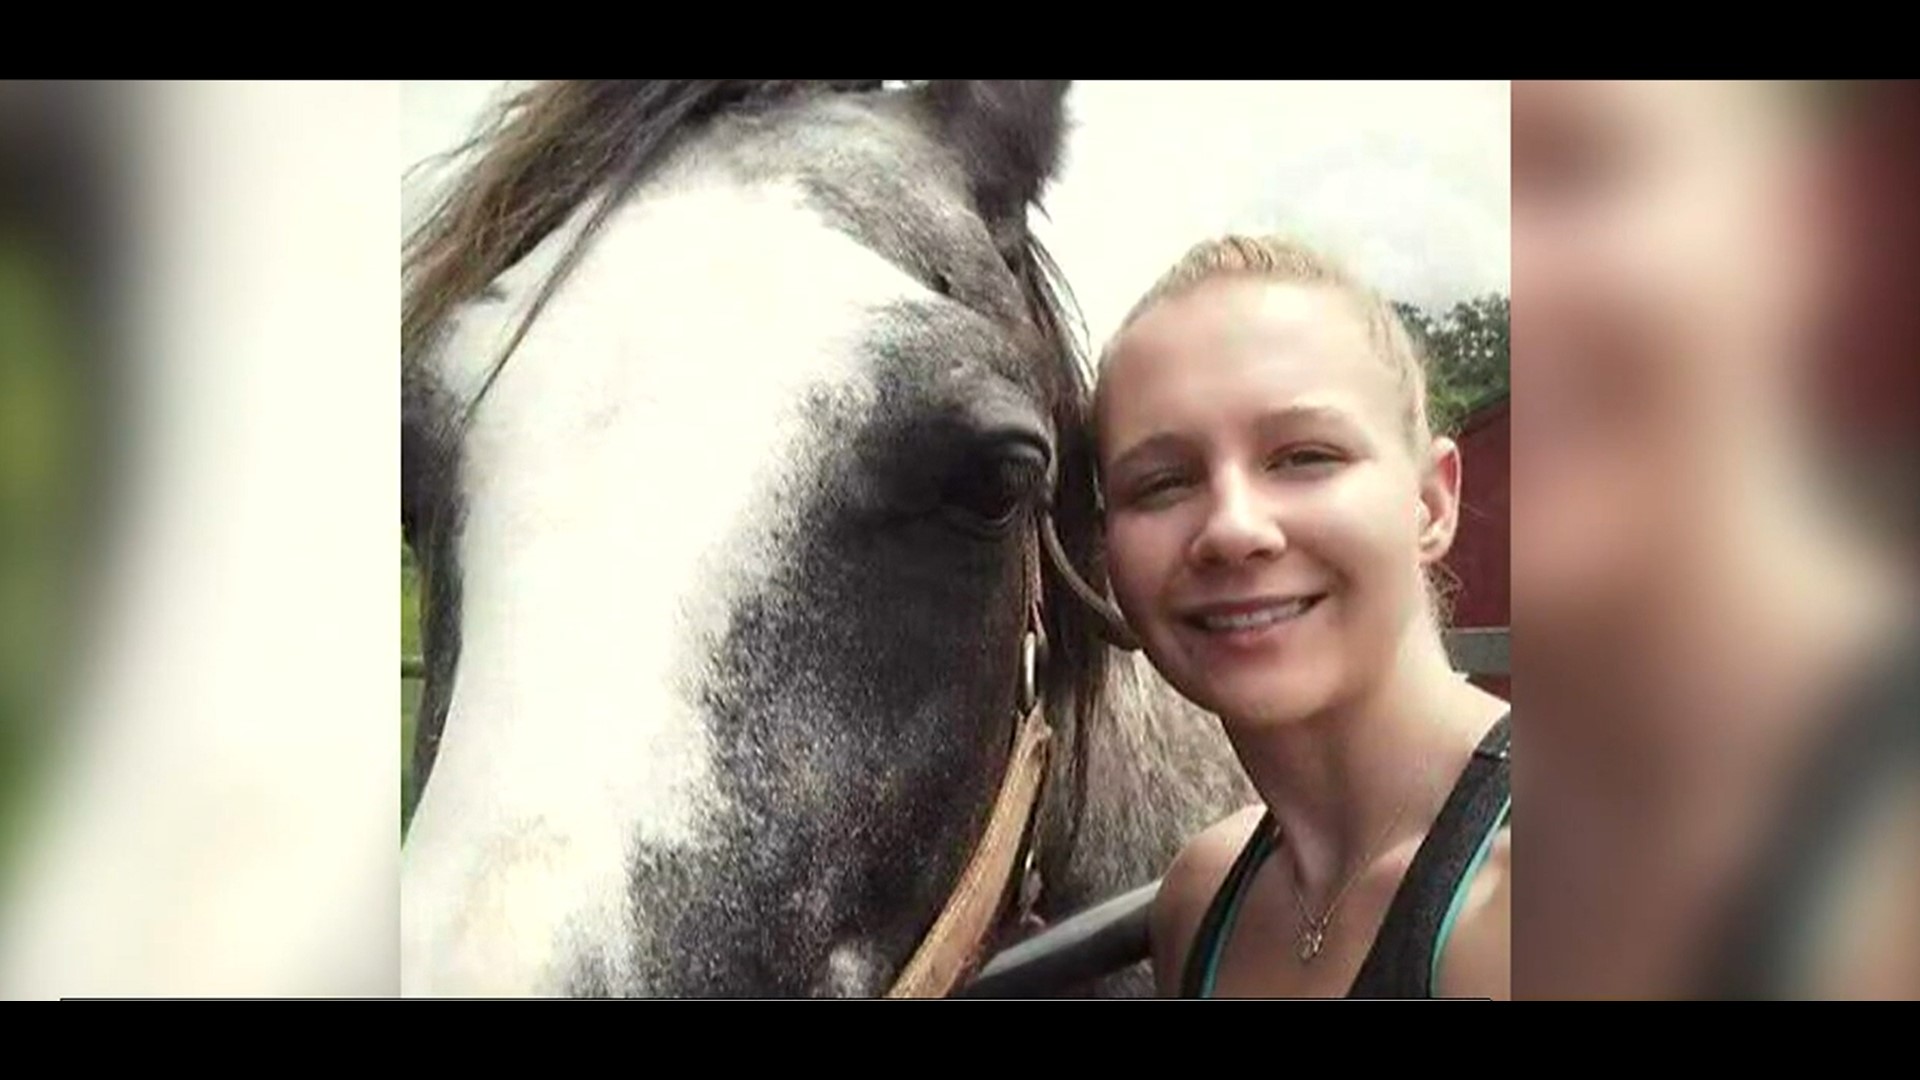 While Air Force veteran Reality Winner said she believes what she did was right, she said there are things she might have done differently.